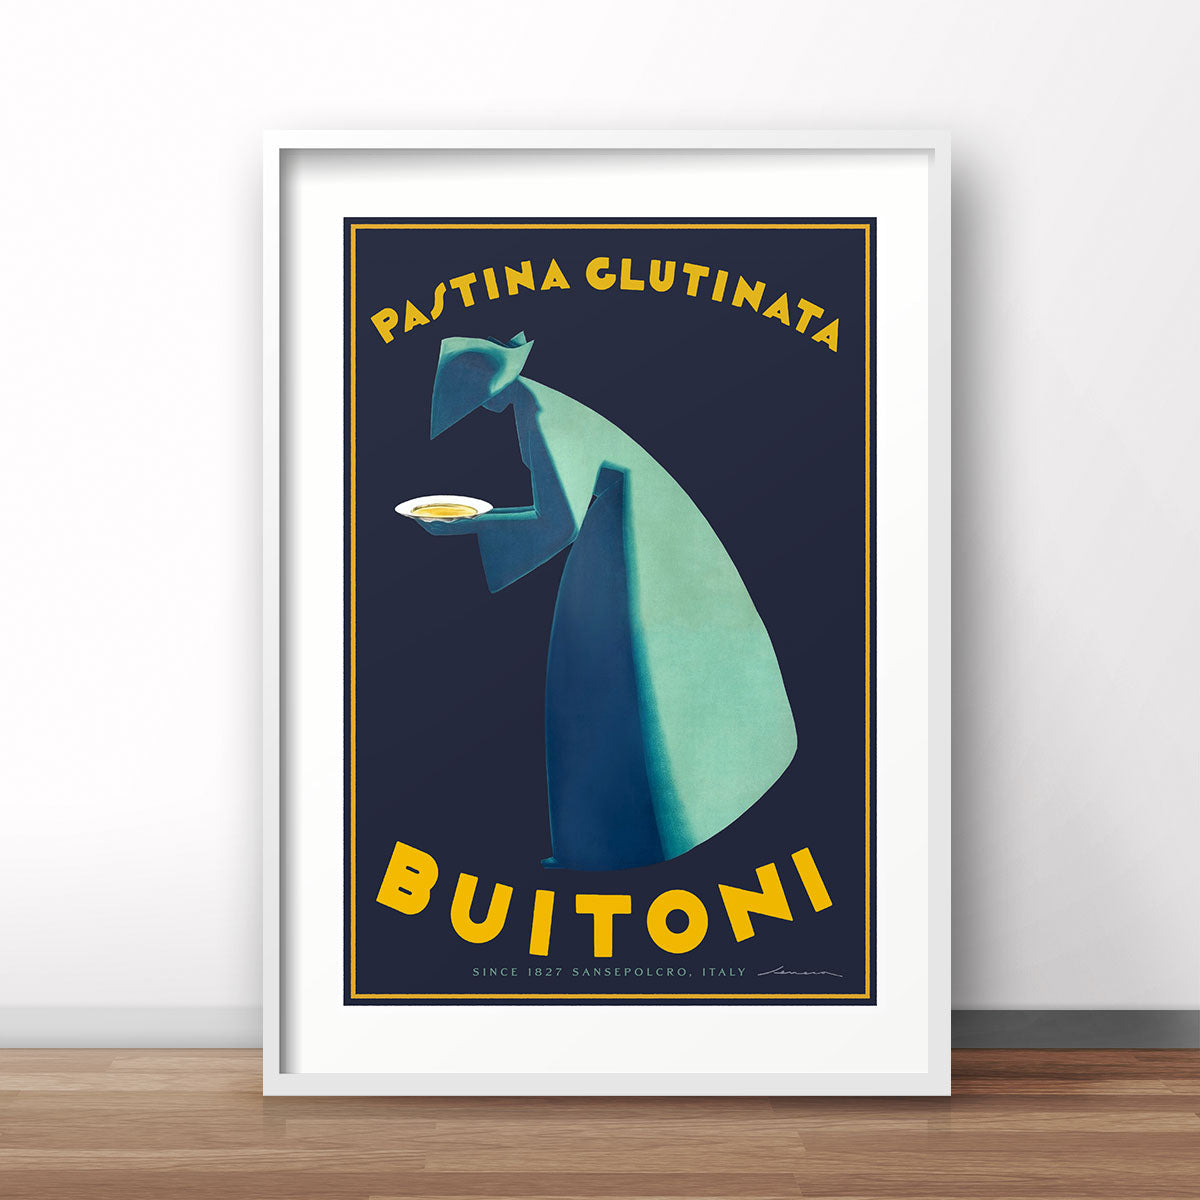 Buitoni Pasta Italy retro vintage poster print from Places We Luv